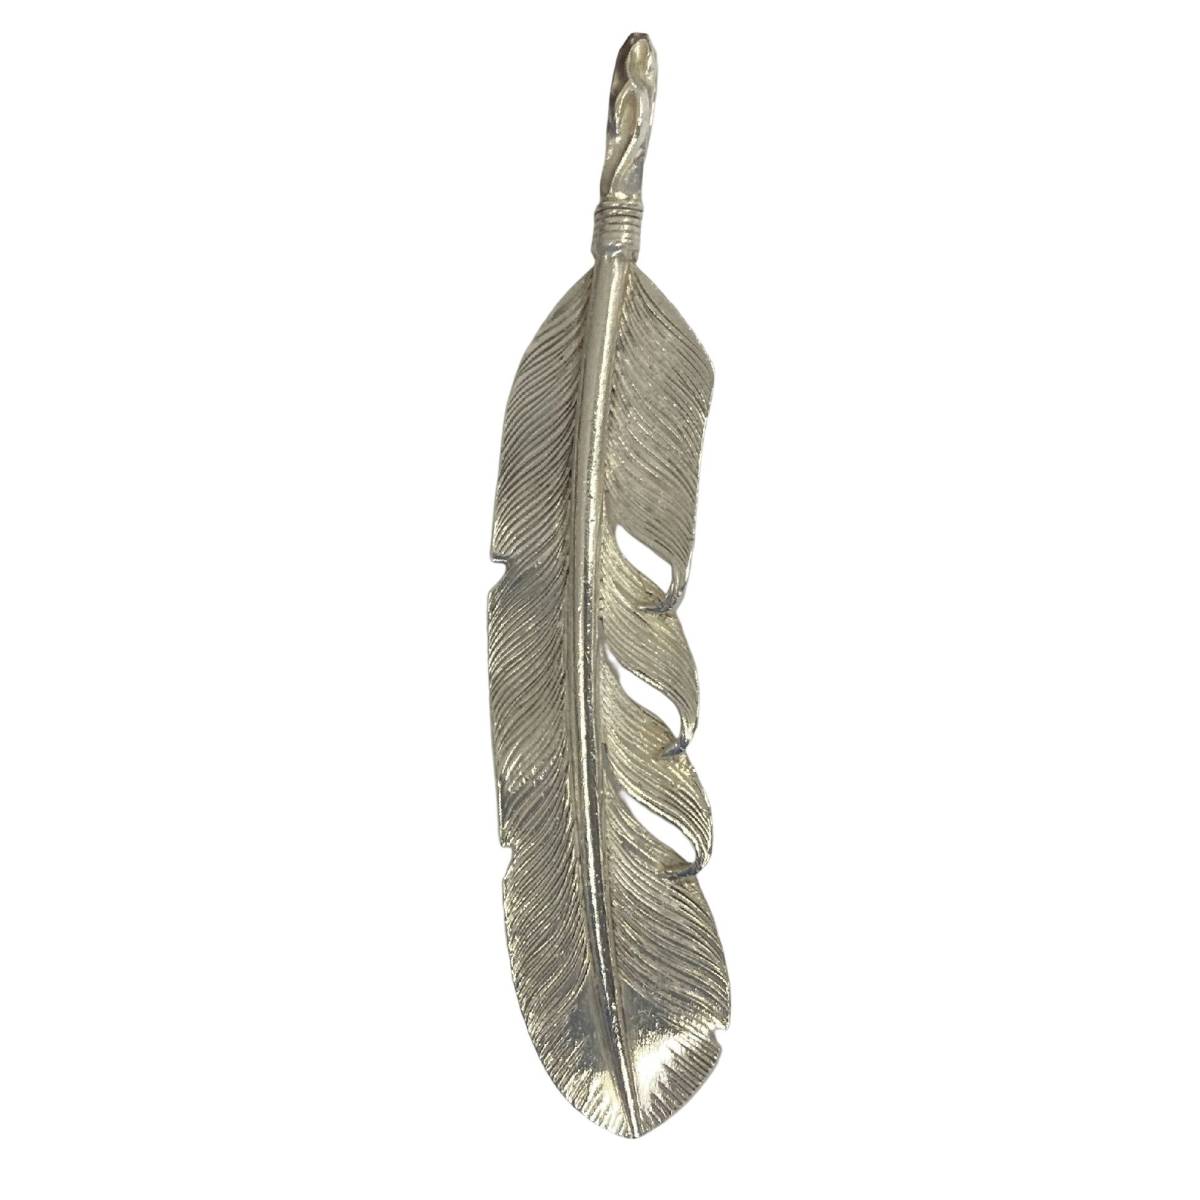 THE FLAT HEAD Flat Head sterling silver all silver extra-large plain feather pendant top charm necklace in gotoRJB